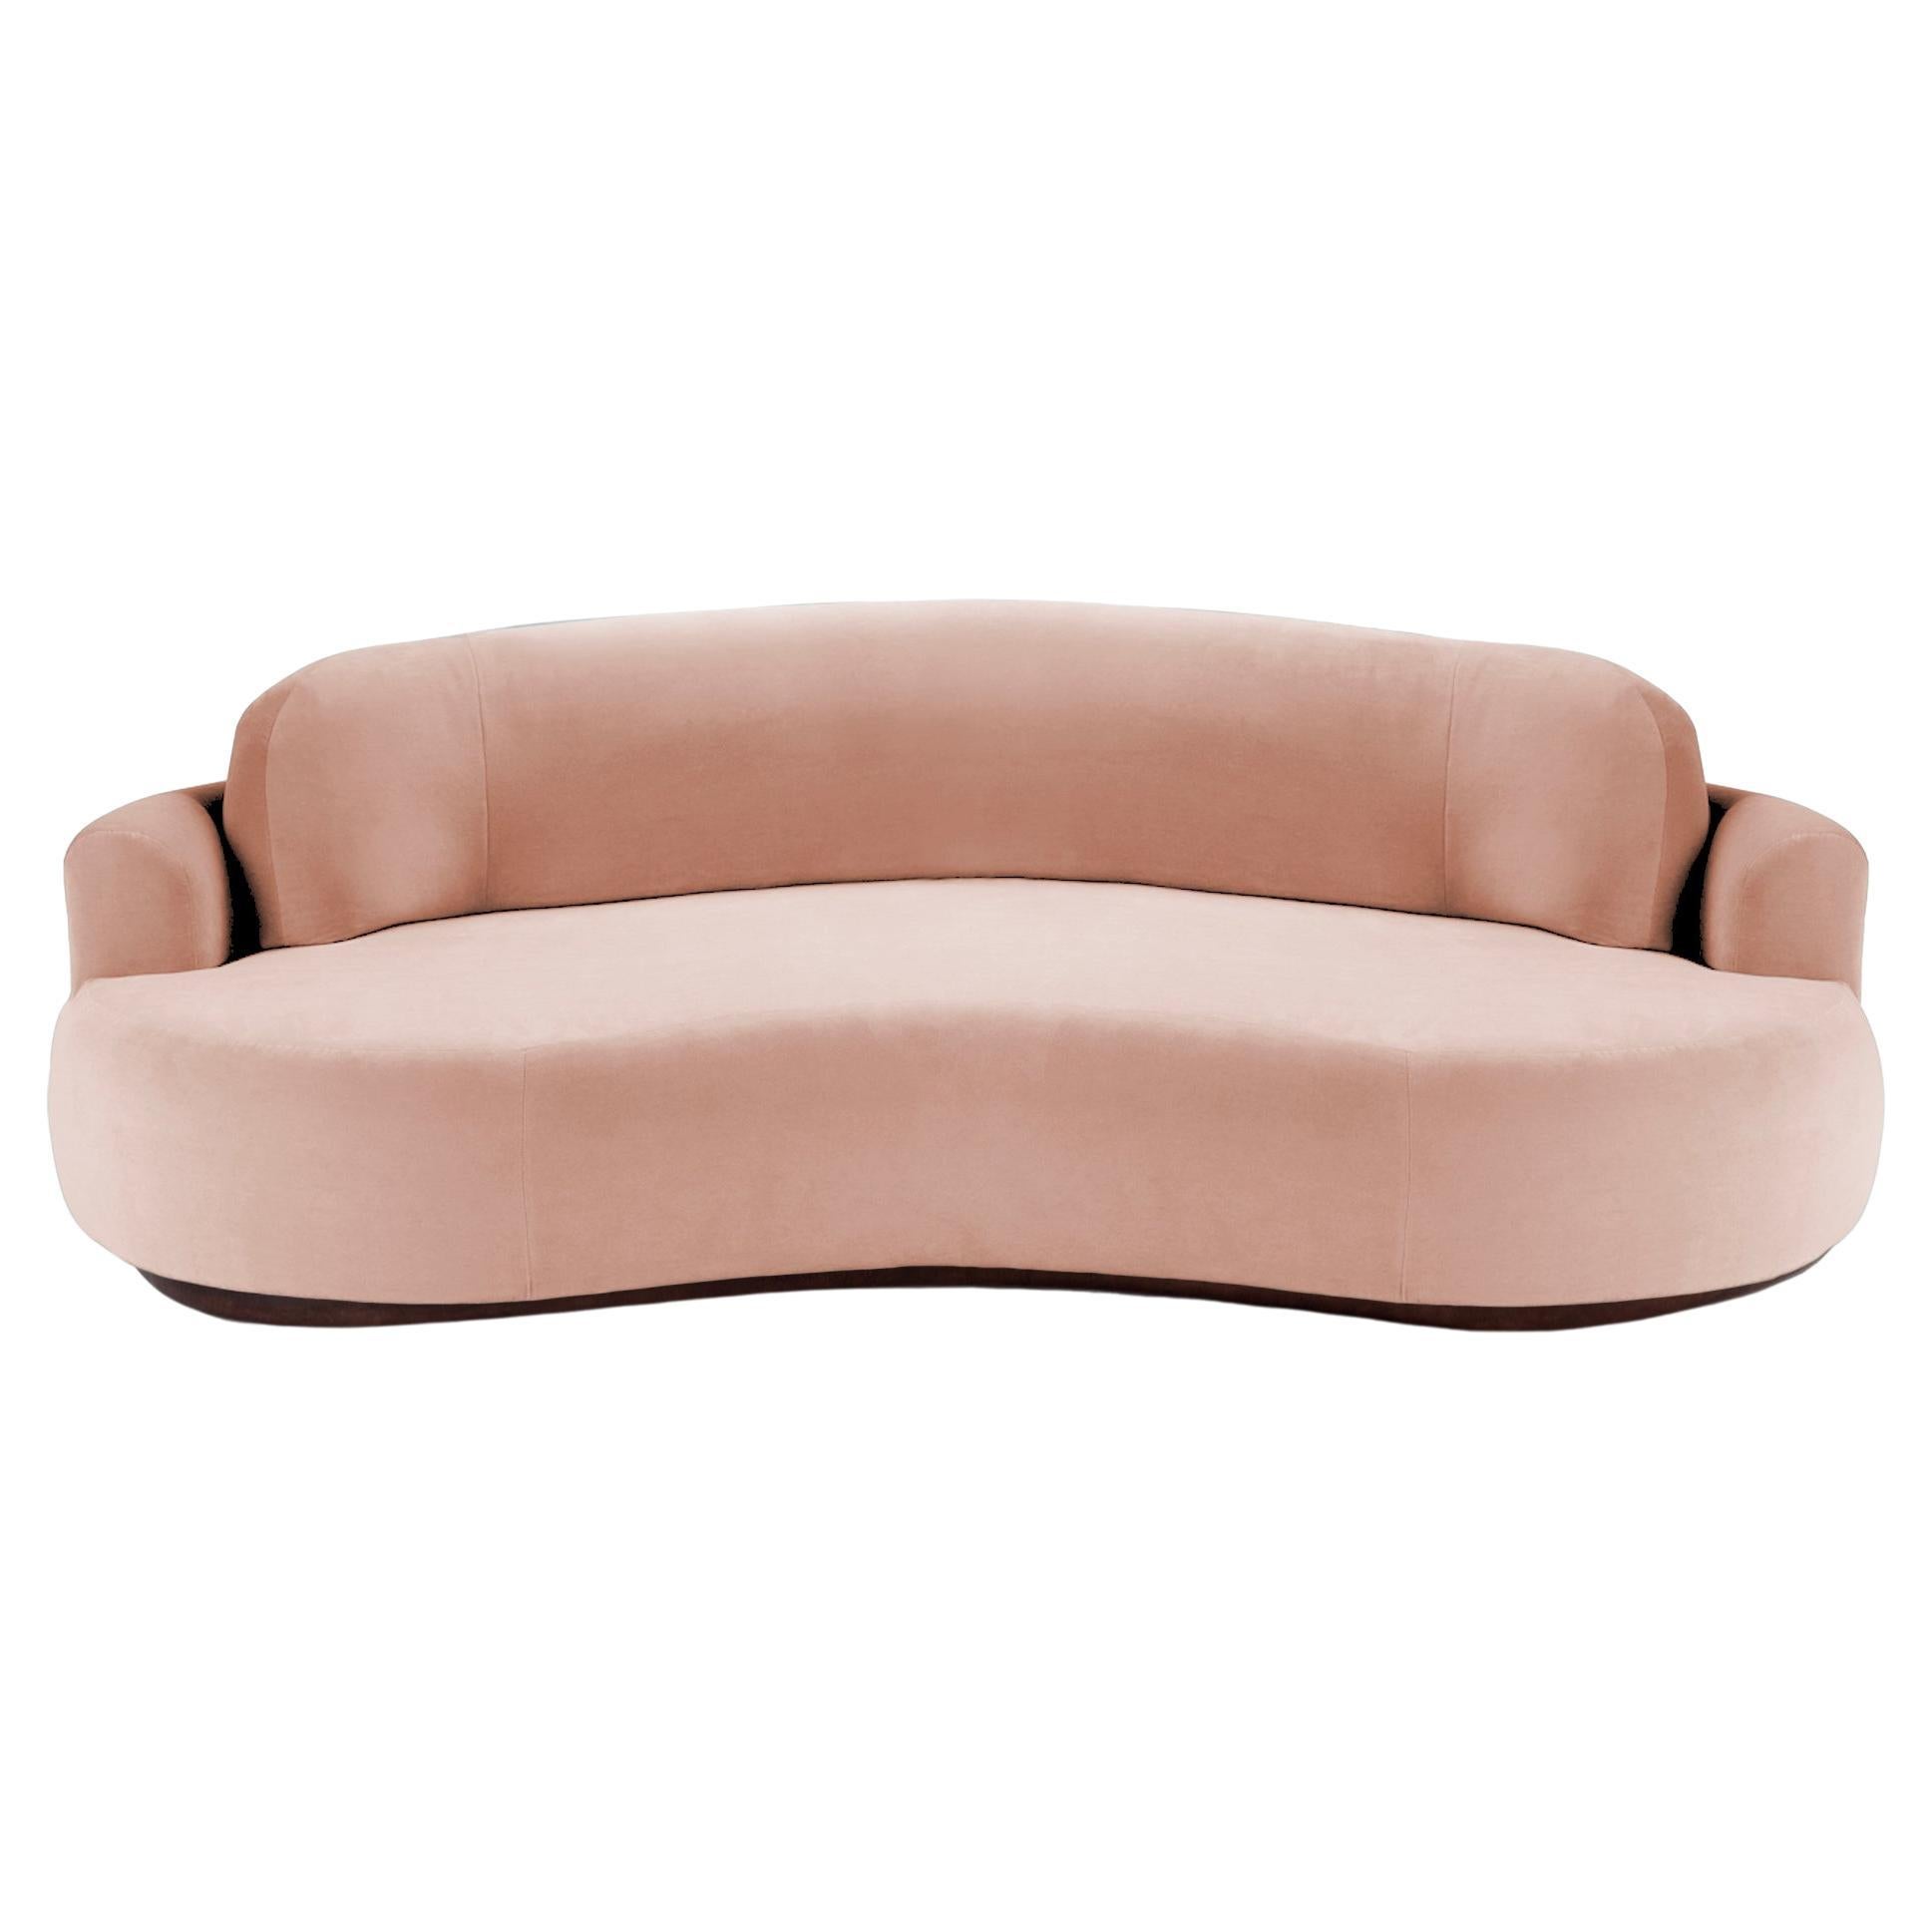 Handmade Contemporary Mambo Unlimited Ideas Naked Round Soft Apricot Upholstery